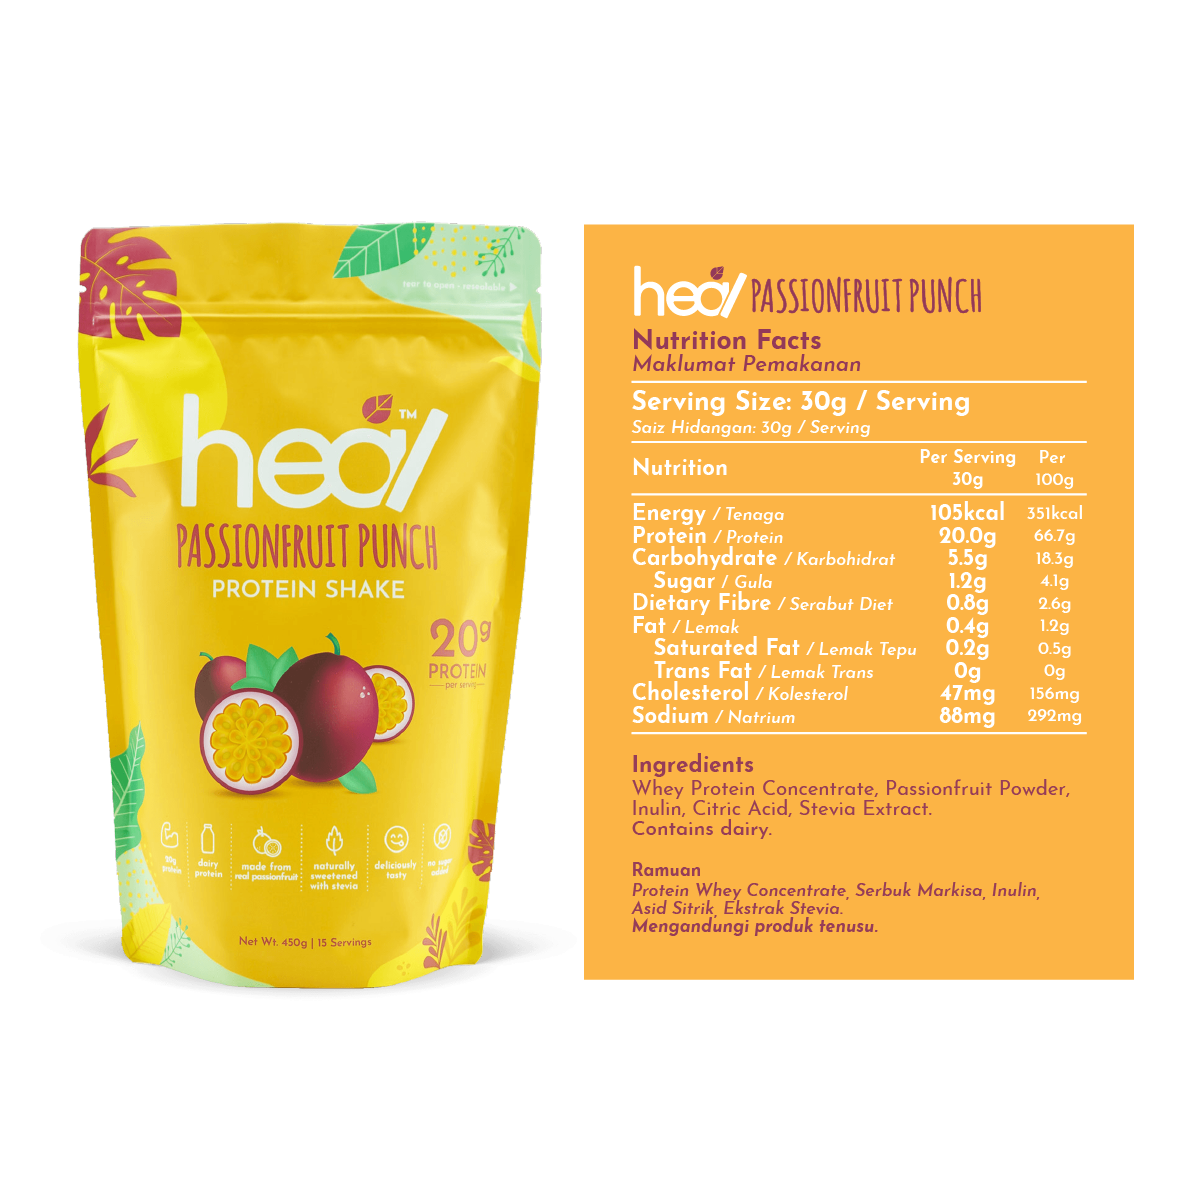 [Subscription Plan] Heal Passionfruit Punch Protein Shake, 15 Servings Value Pack